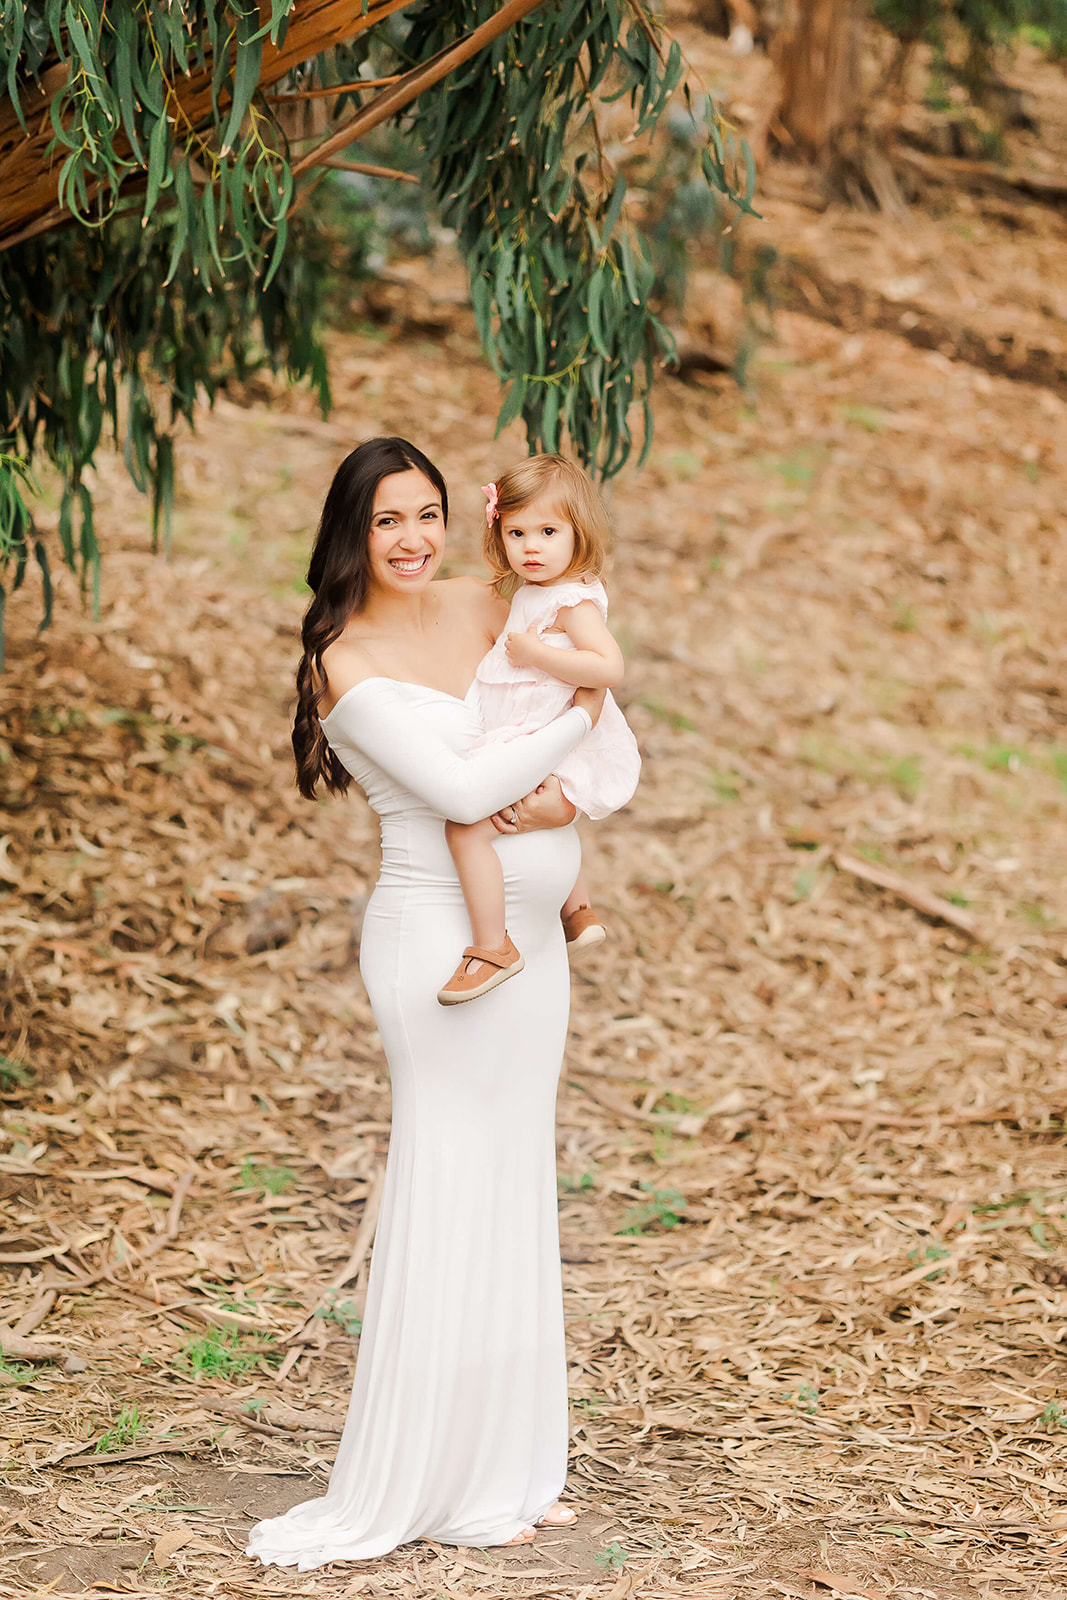 mom to be in white maternity gown holding her young daughter Orange county midwife